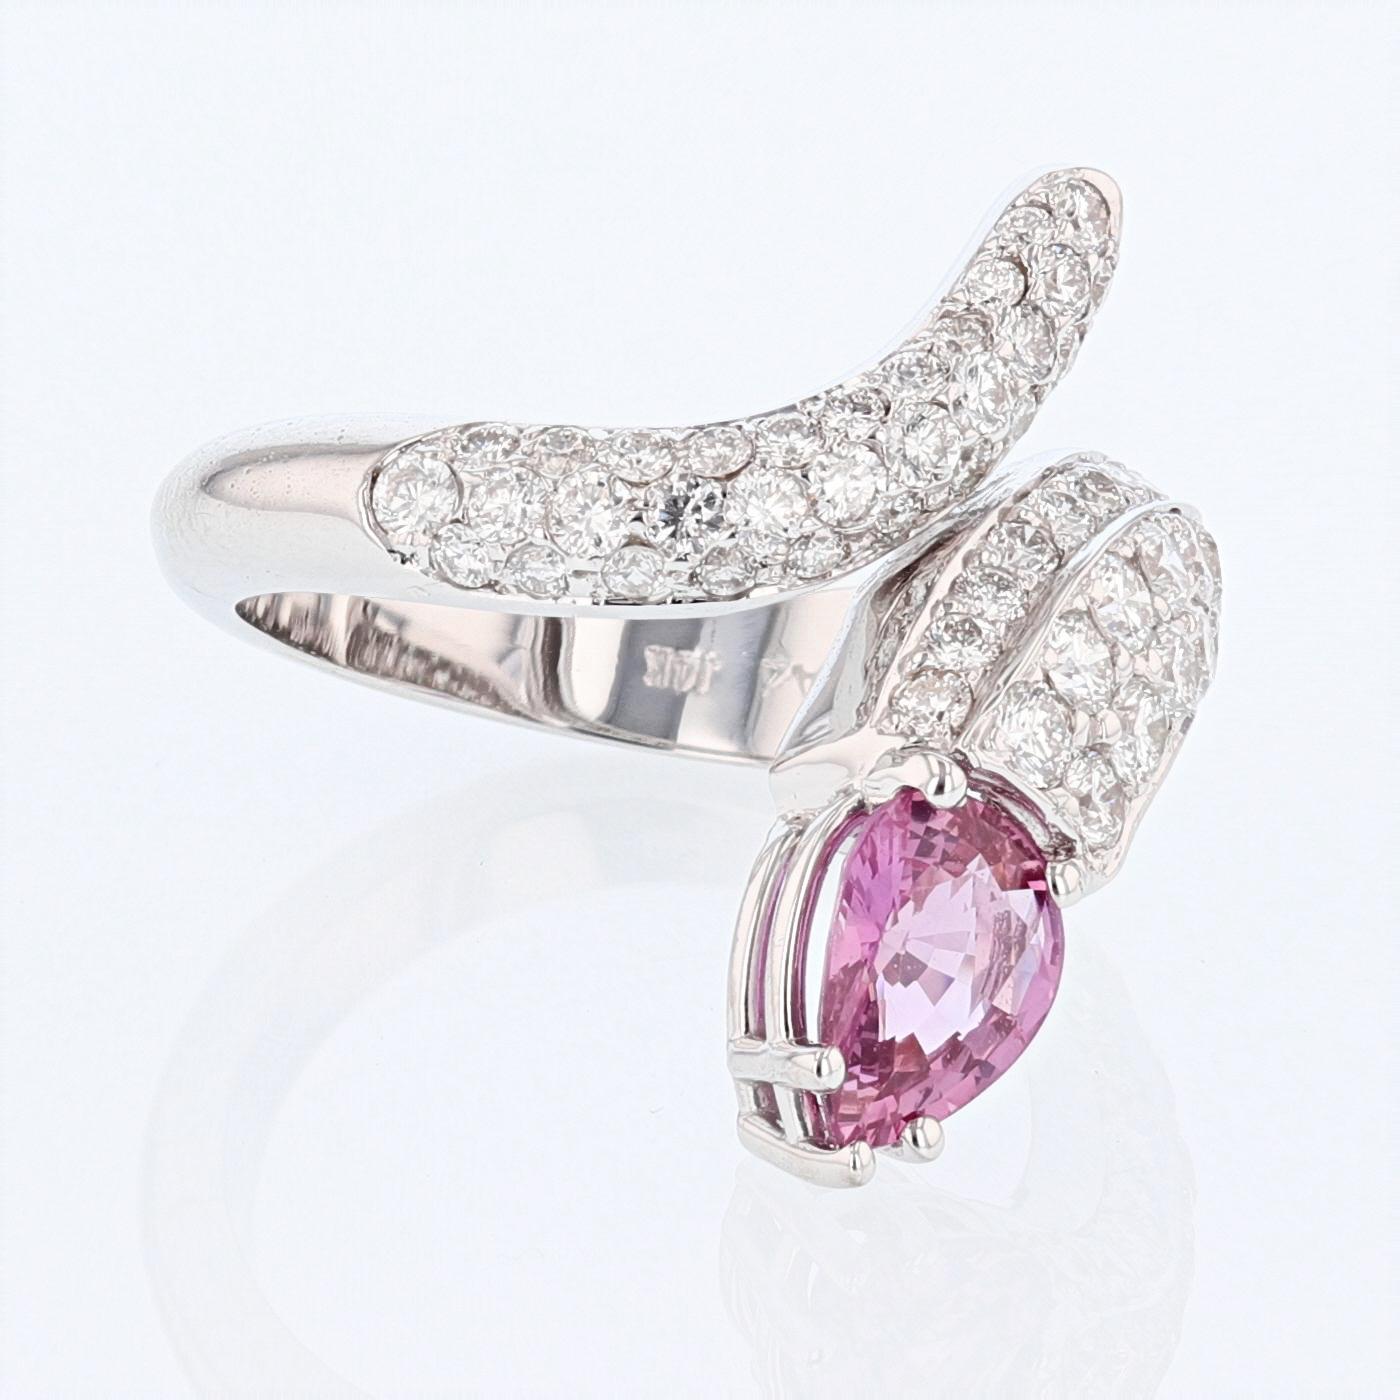 This ring is made in 14k white gold and features a 1.25ct pear shape pink sapphire prong set for the center stone. The ring also features 69 round cut diamonds pave set on the shank of the ring weighing 1.46ct total color grade (H) clarity grade